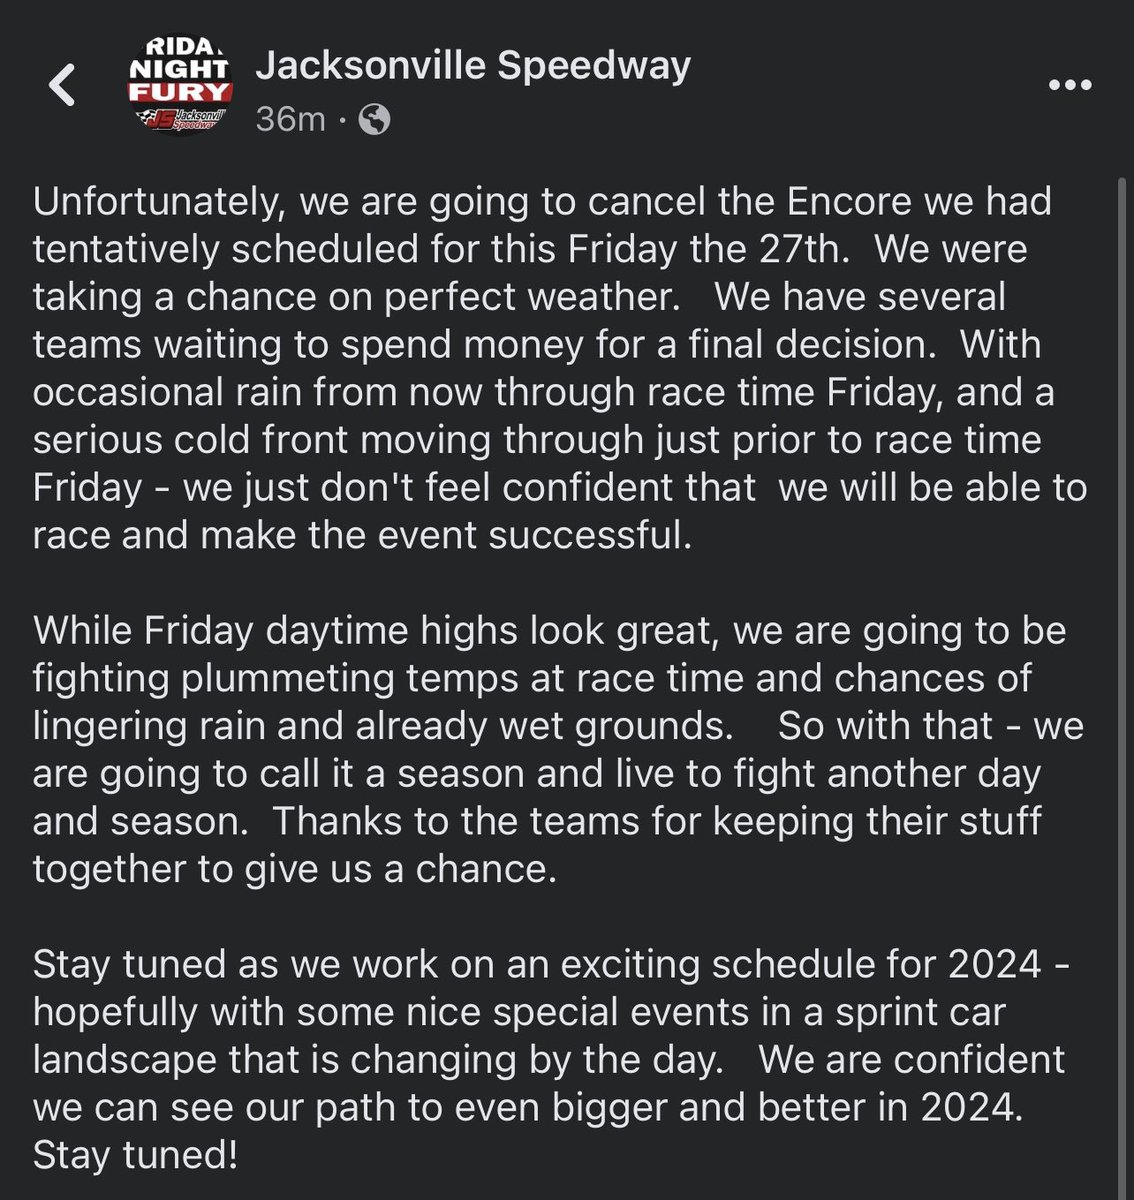 Friday’s “The Encore” has been cancelled due to weather. We’ll call it a year and come back in spring of 2024!